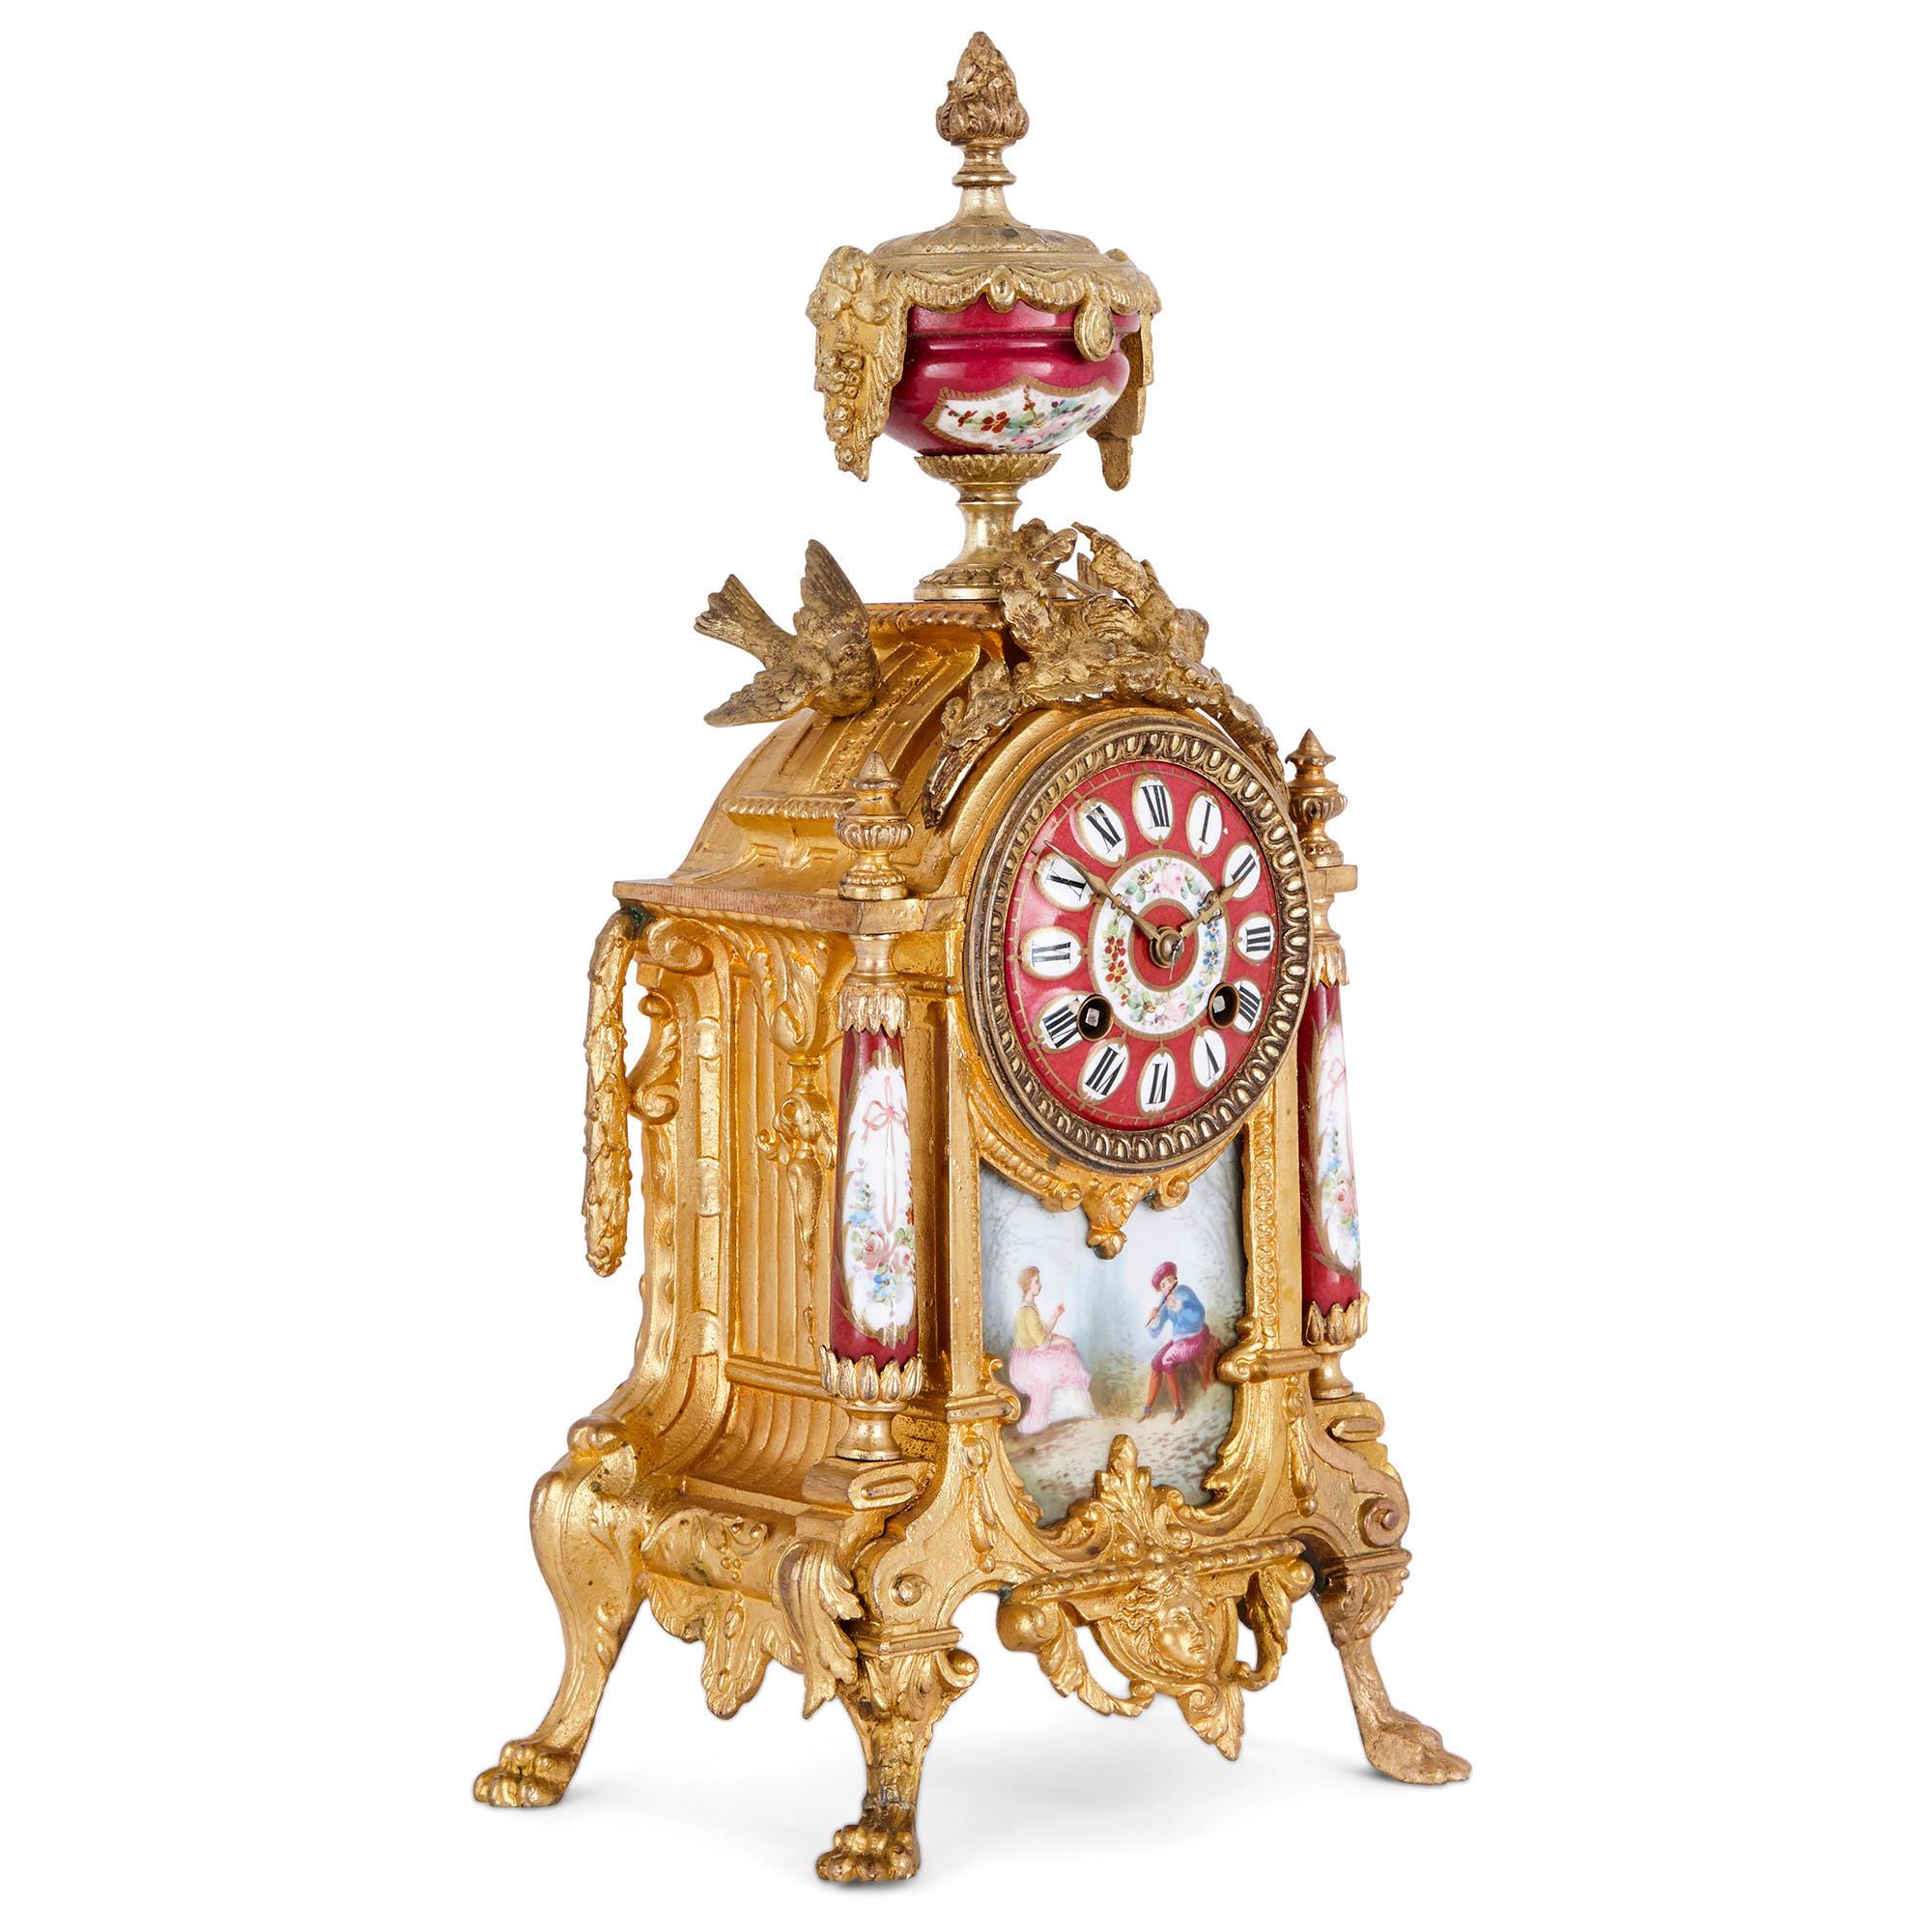 This wonderful clock set displays many of the characteristics of the 18th century Rococo style. These include gracefulness, asymmetry, and the use of curved forms. The set, which includes a mantel clock and pair of vases, is crafted from gilt metal